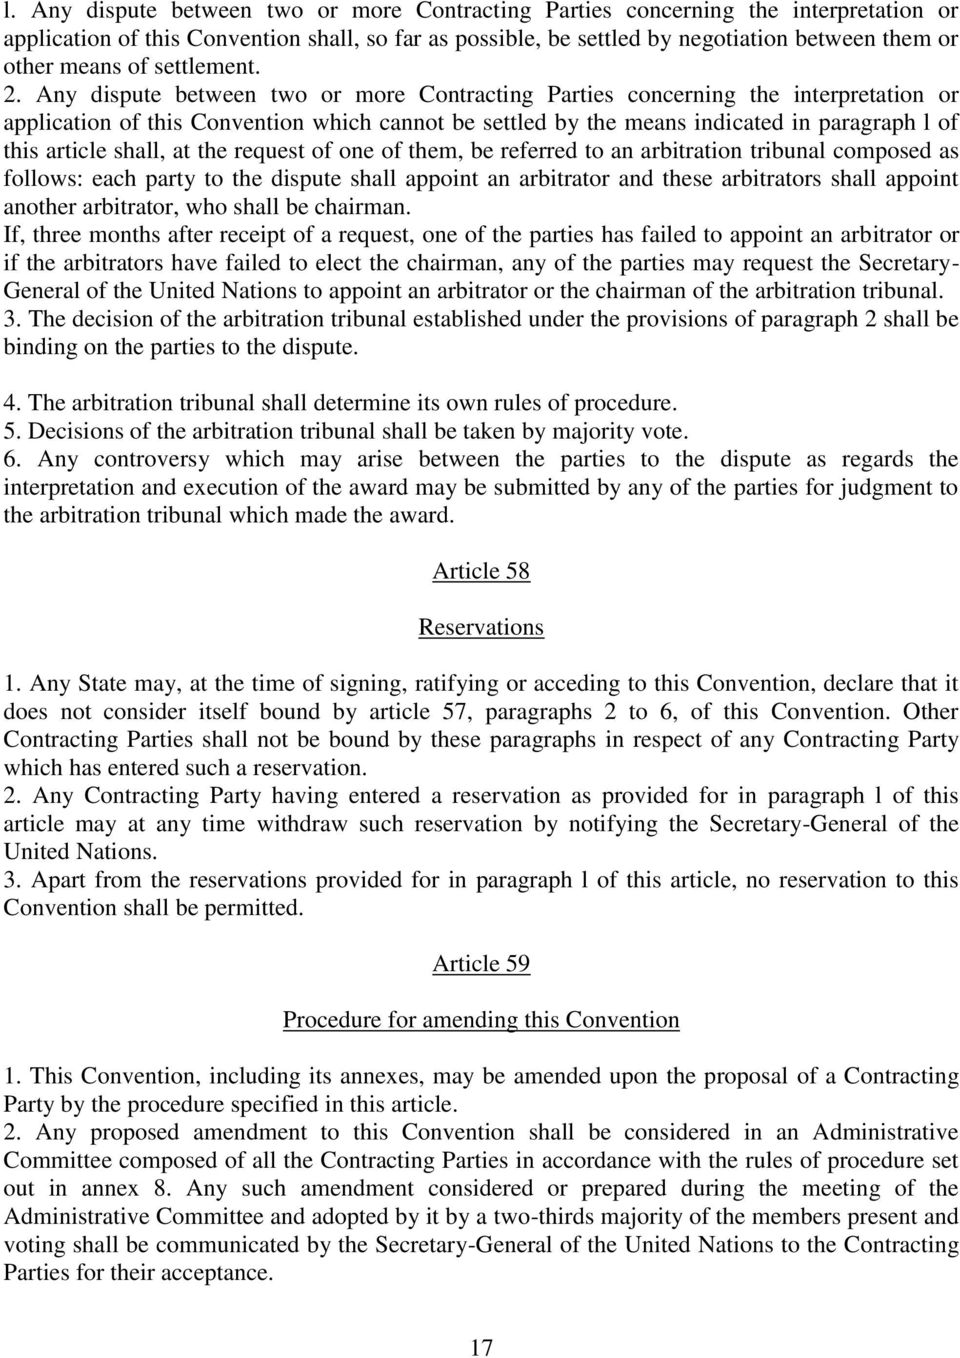 Any dispute between two or more Contracting Parties concerning the interpretation or application of this Convention which cannot be settled by the means indicated in paragraph l of this article